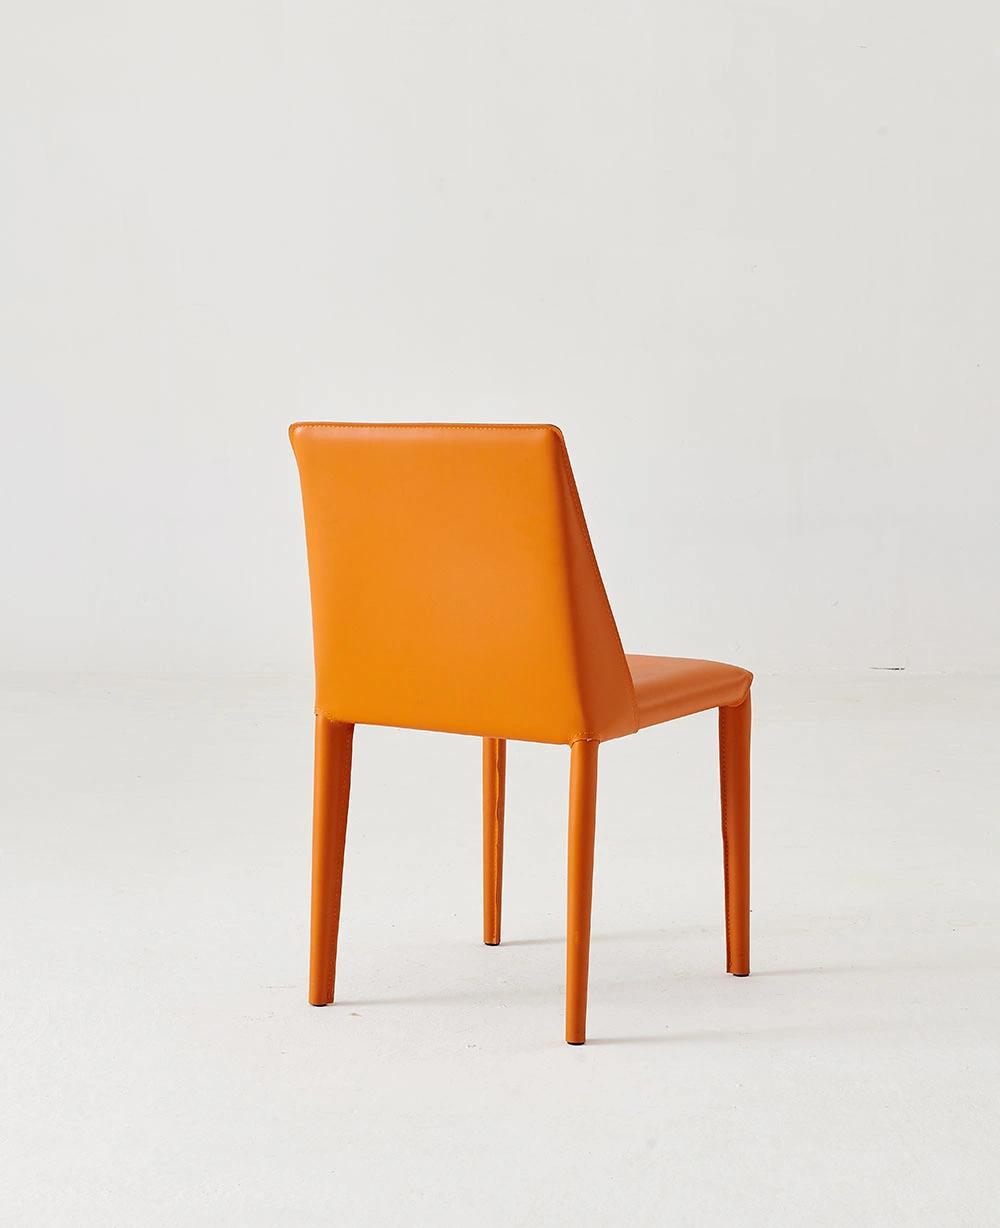 Hot Selling New Design Furniture Orange Dining Chair